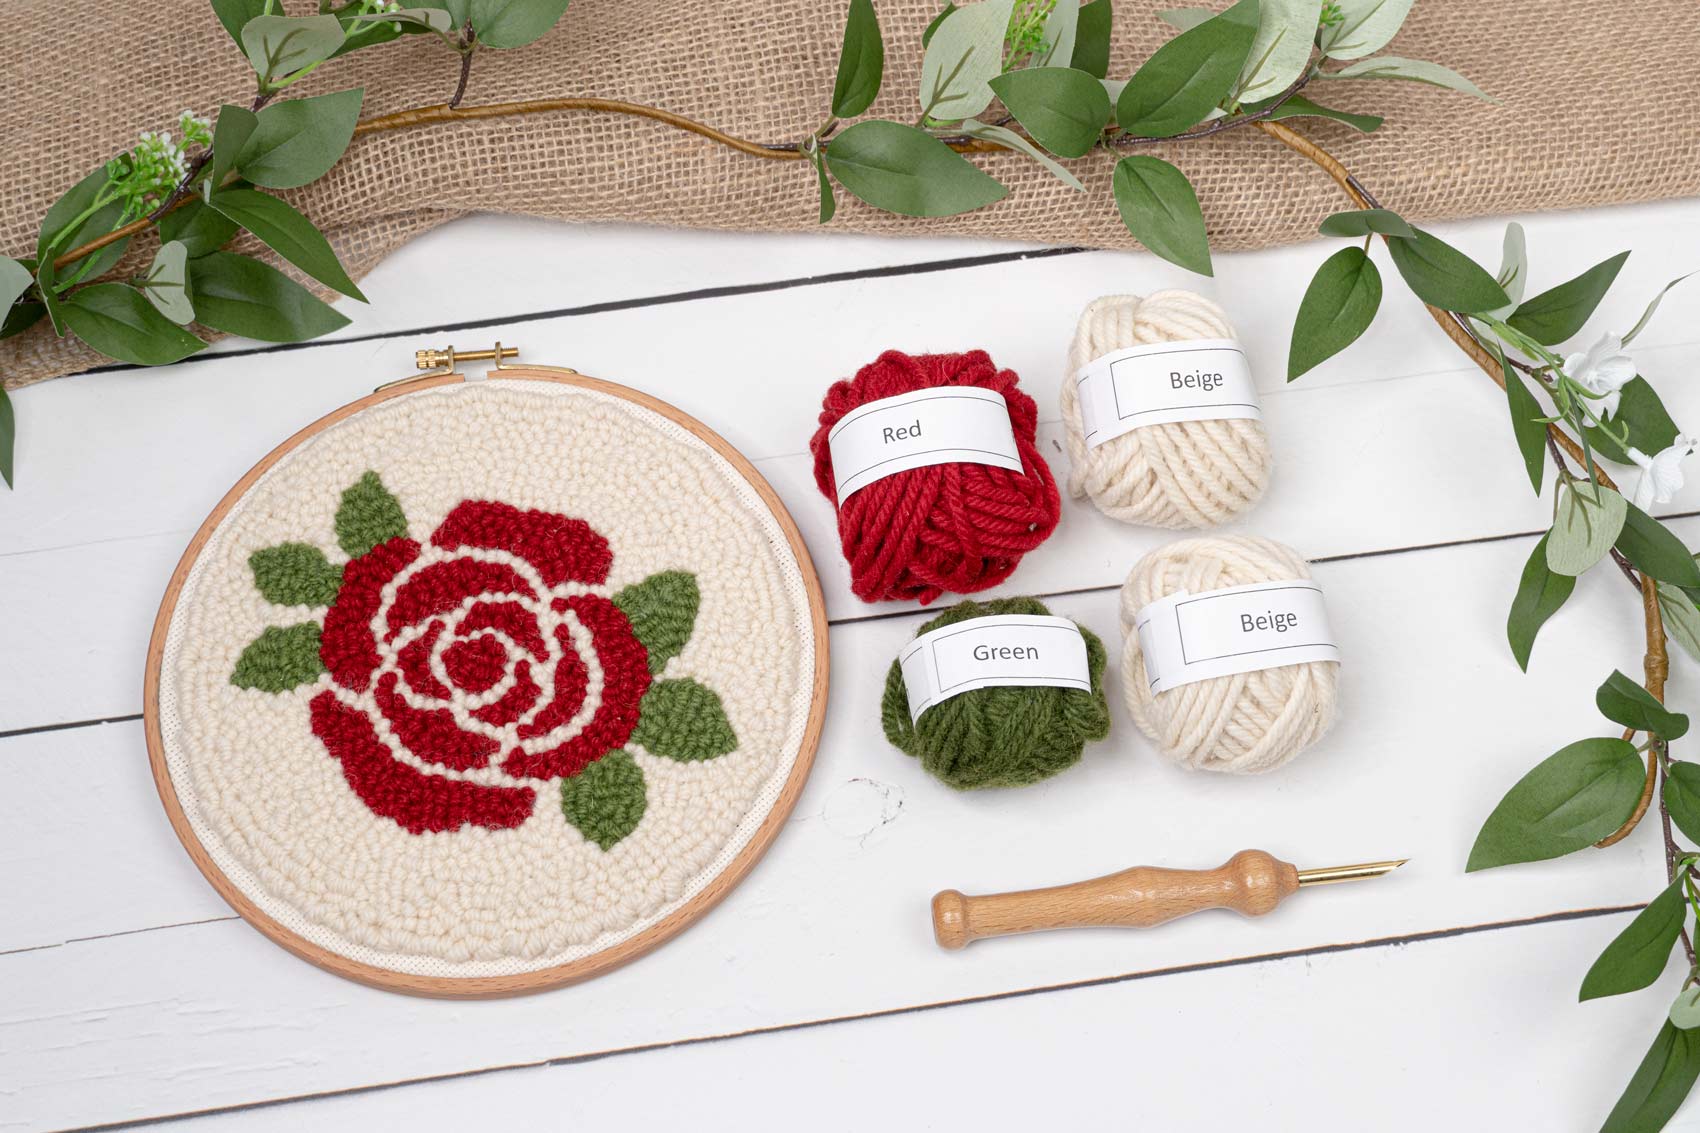 Rose Mini Punch Needle Kit - Includes Punch Needle Tool, 100% Wool Yarn, 8 inch Beech Wood Hoop, and More